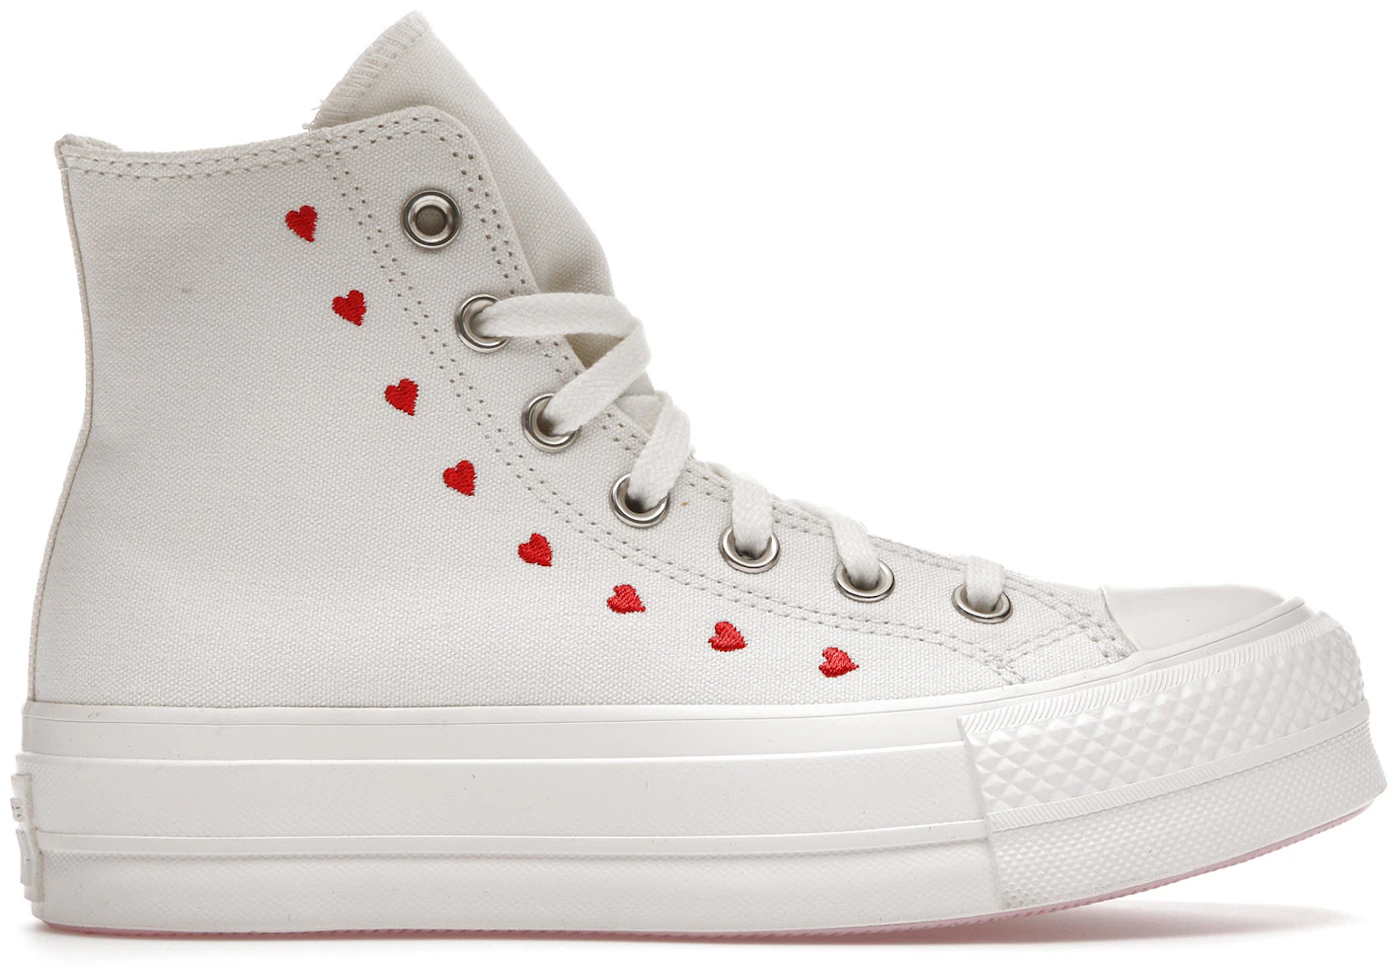 Converse Chuck Taylor Hi White Red (Women's) - A01599C - US